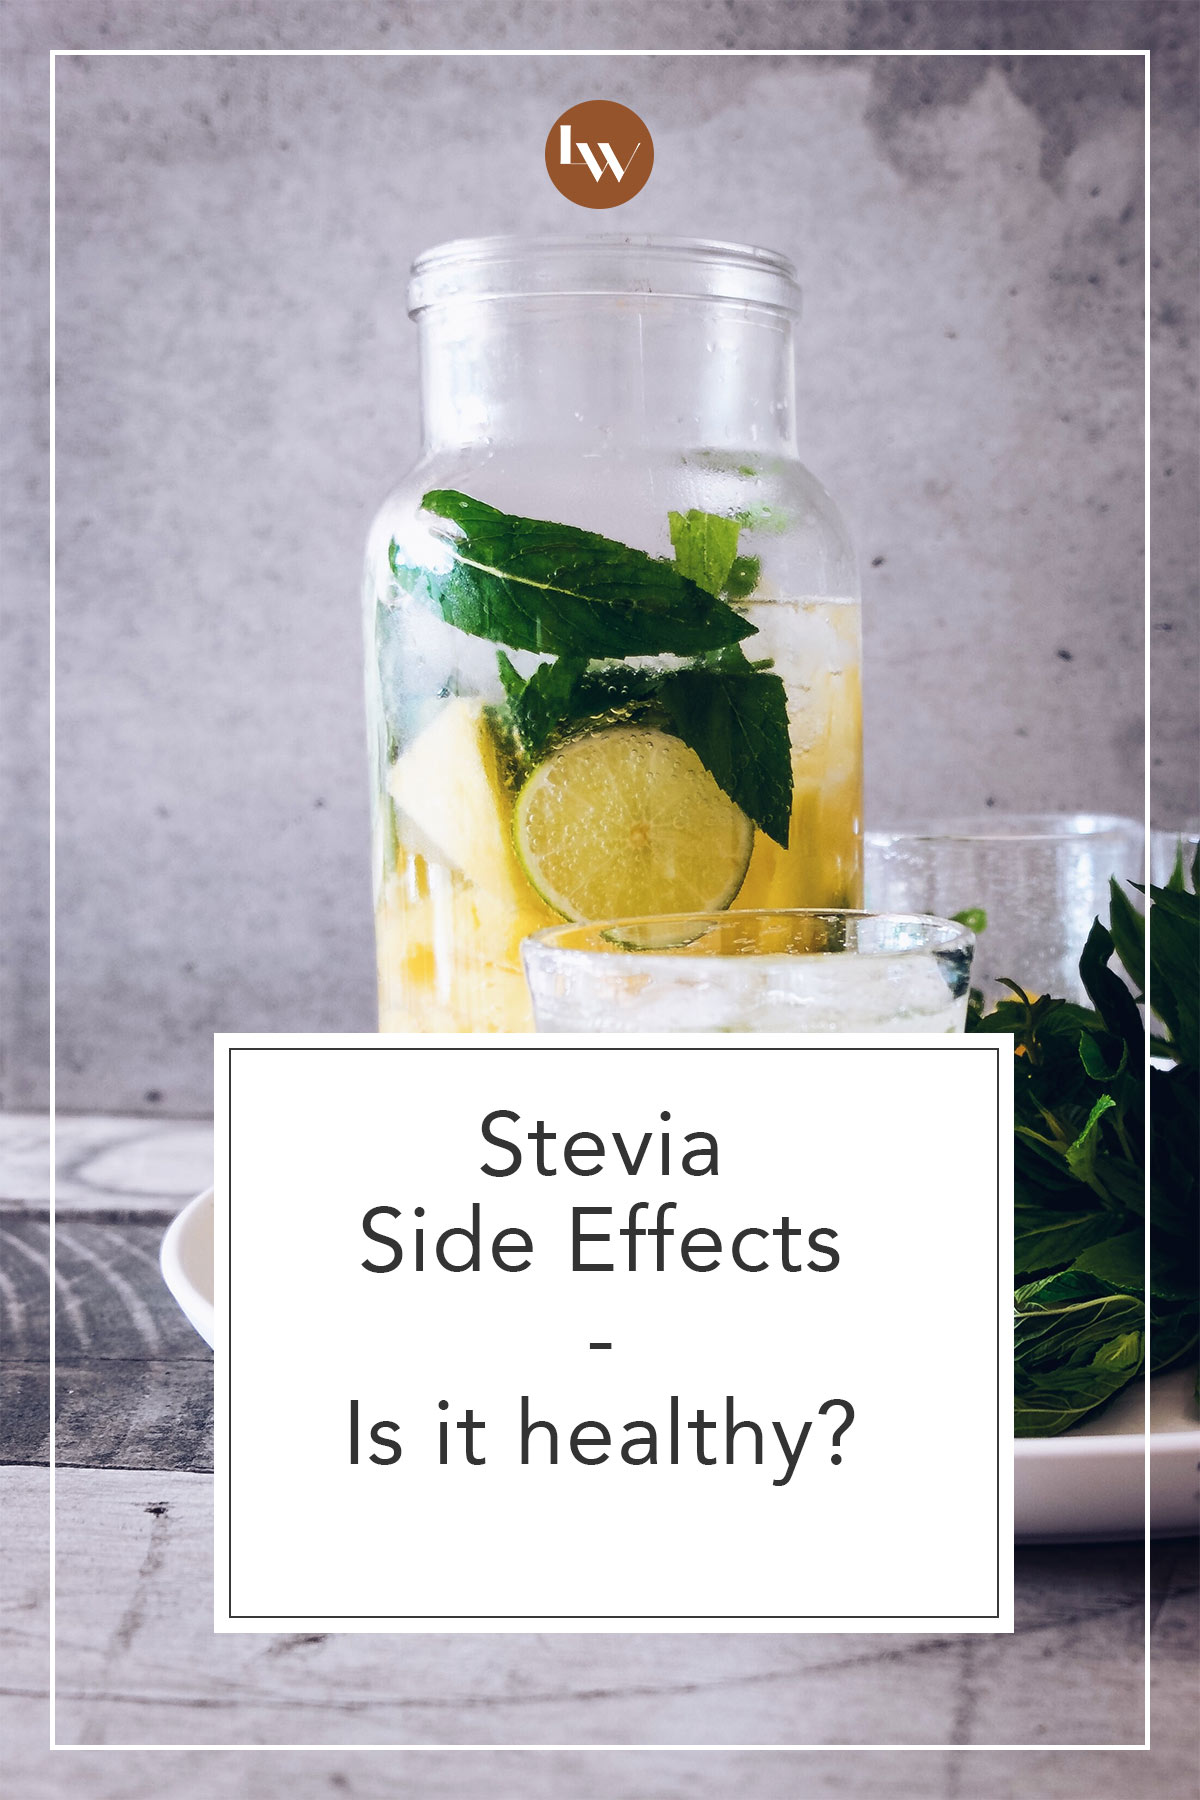 Stevia Side Effects Is it safe? The Living Well